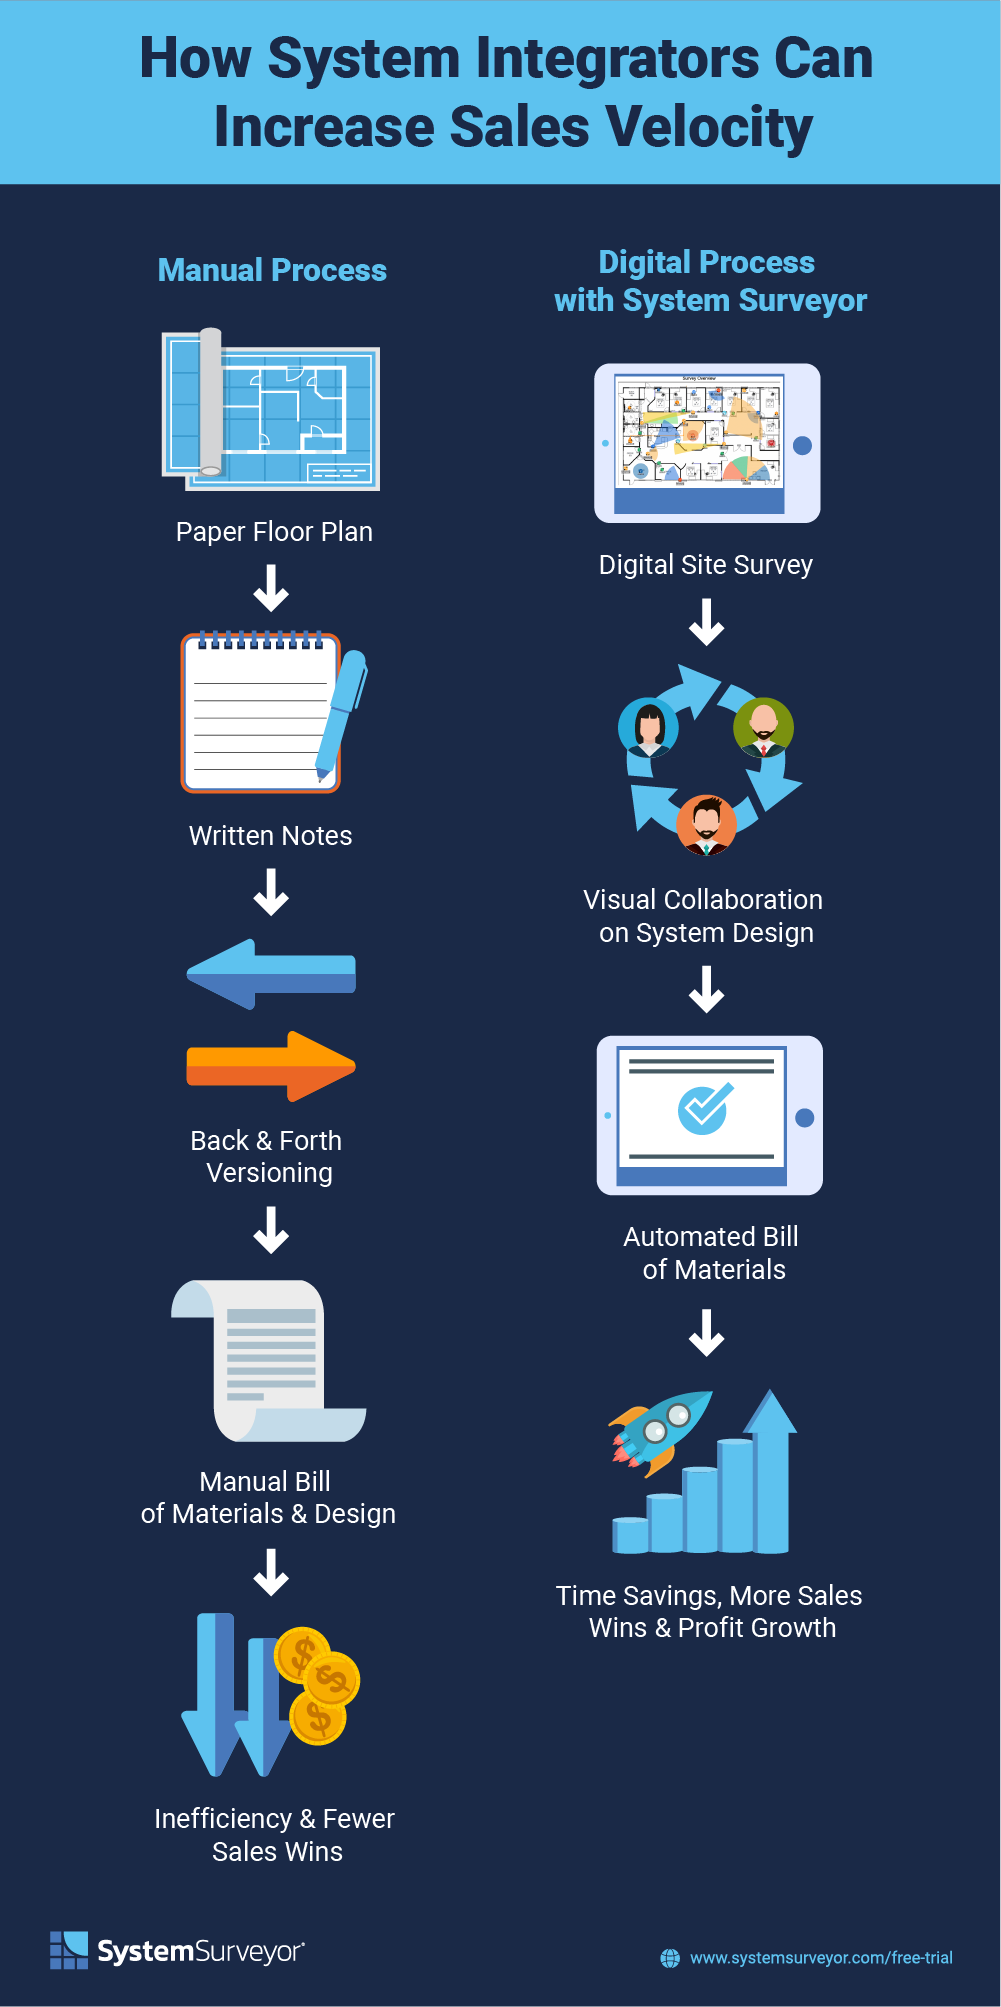 An infographic comparing the manual system design process to using System Surveyor's digital platform to boost sales velocity.